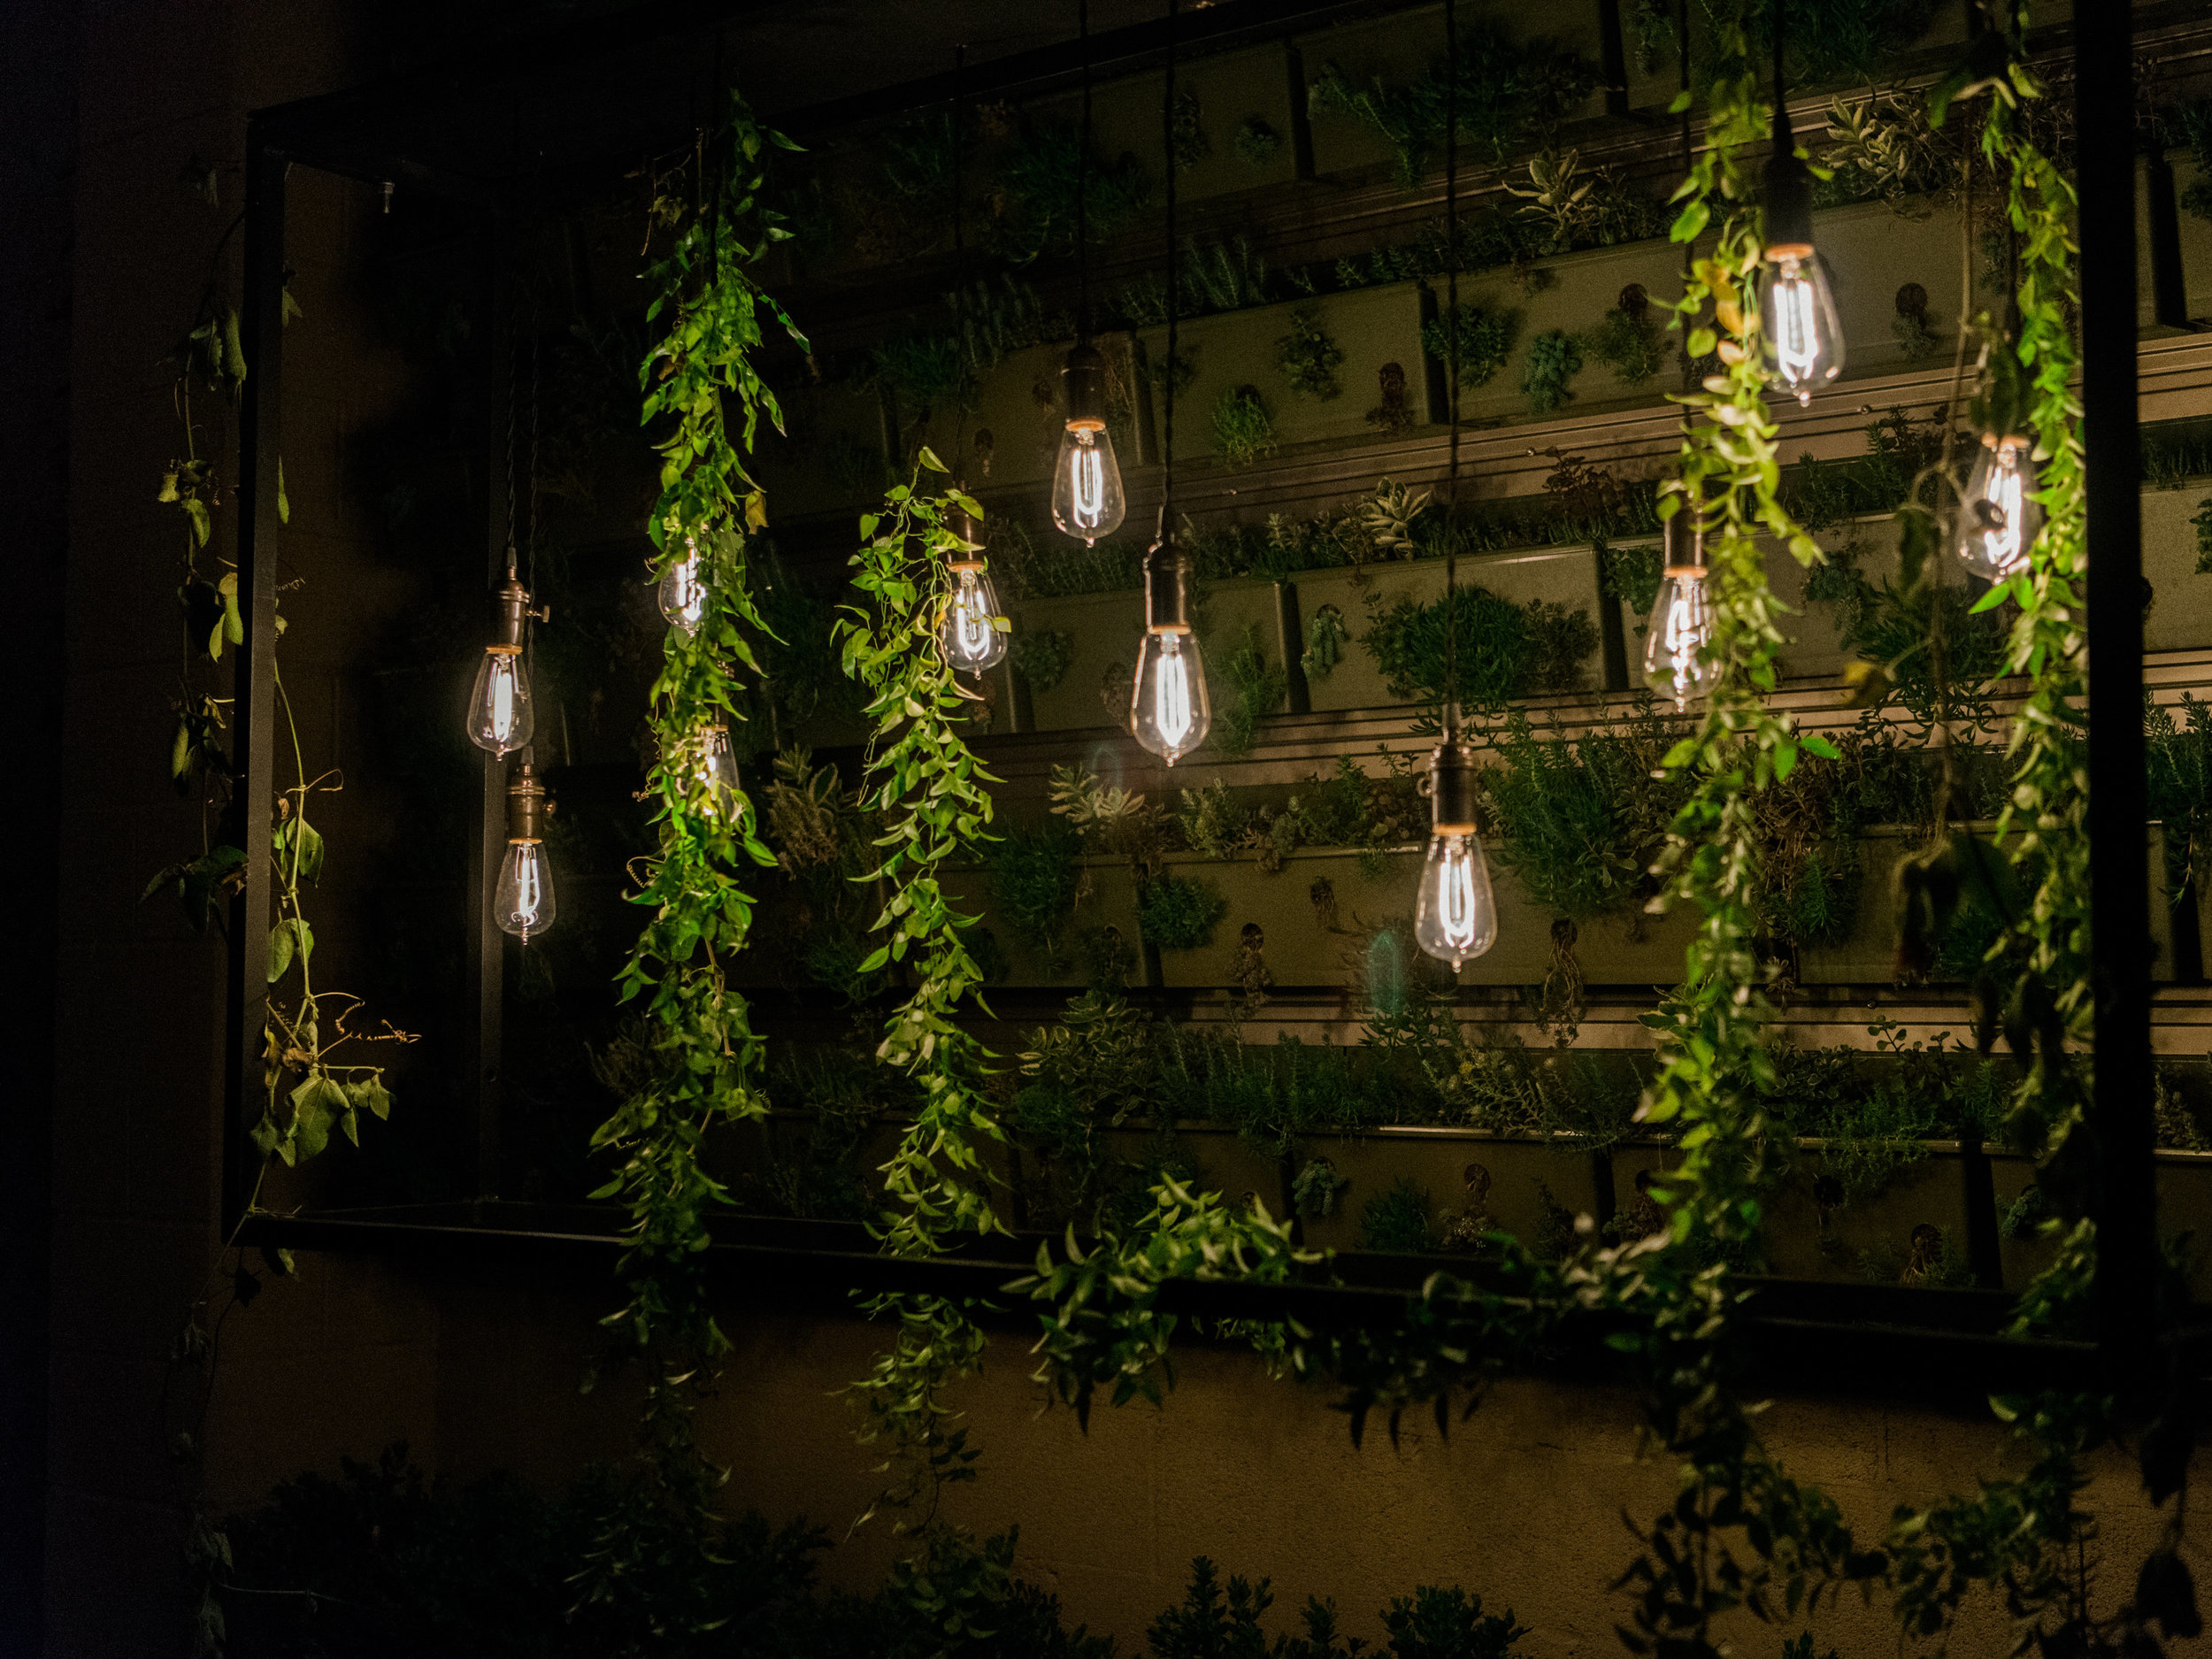 Edison bulb lights against greenery in outdoor event space